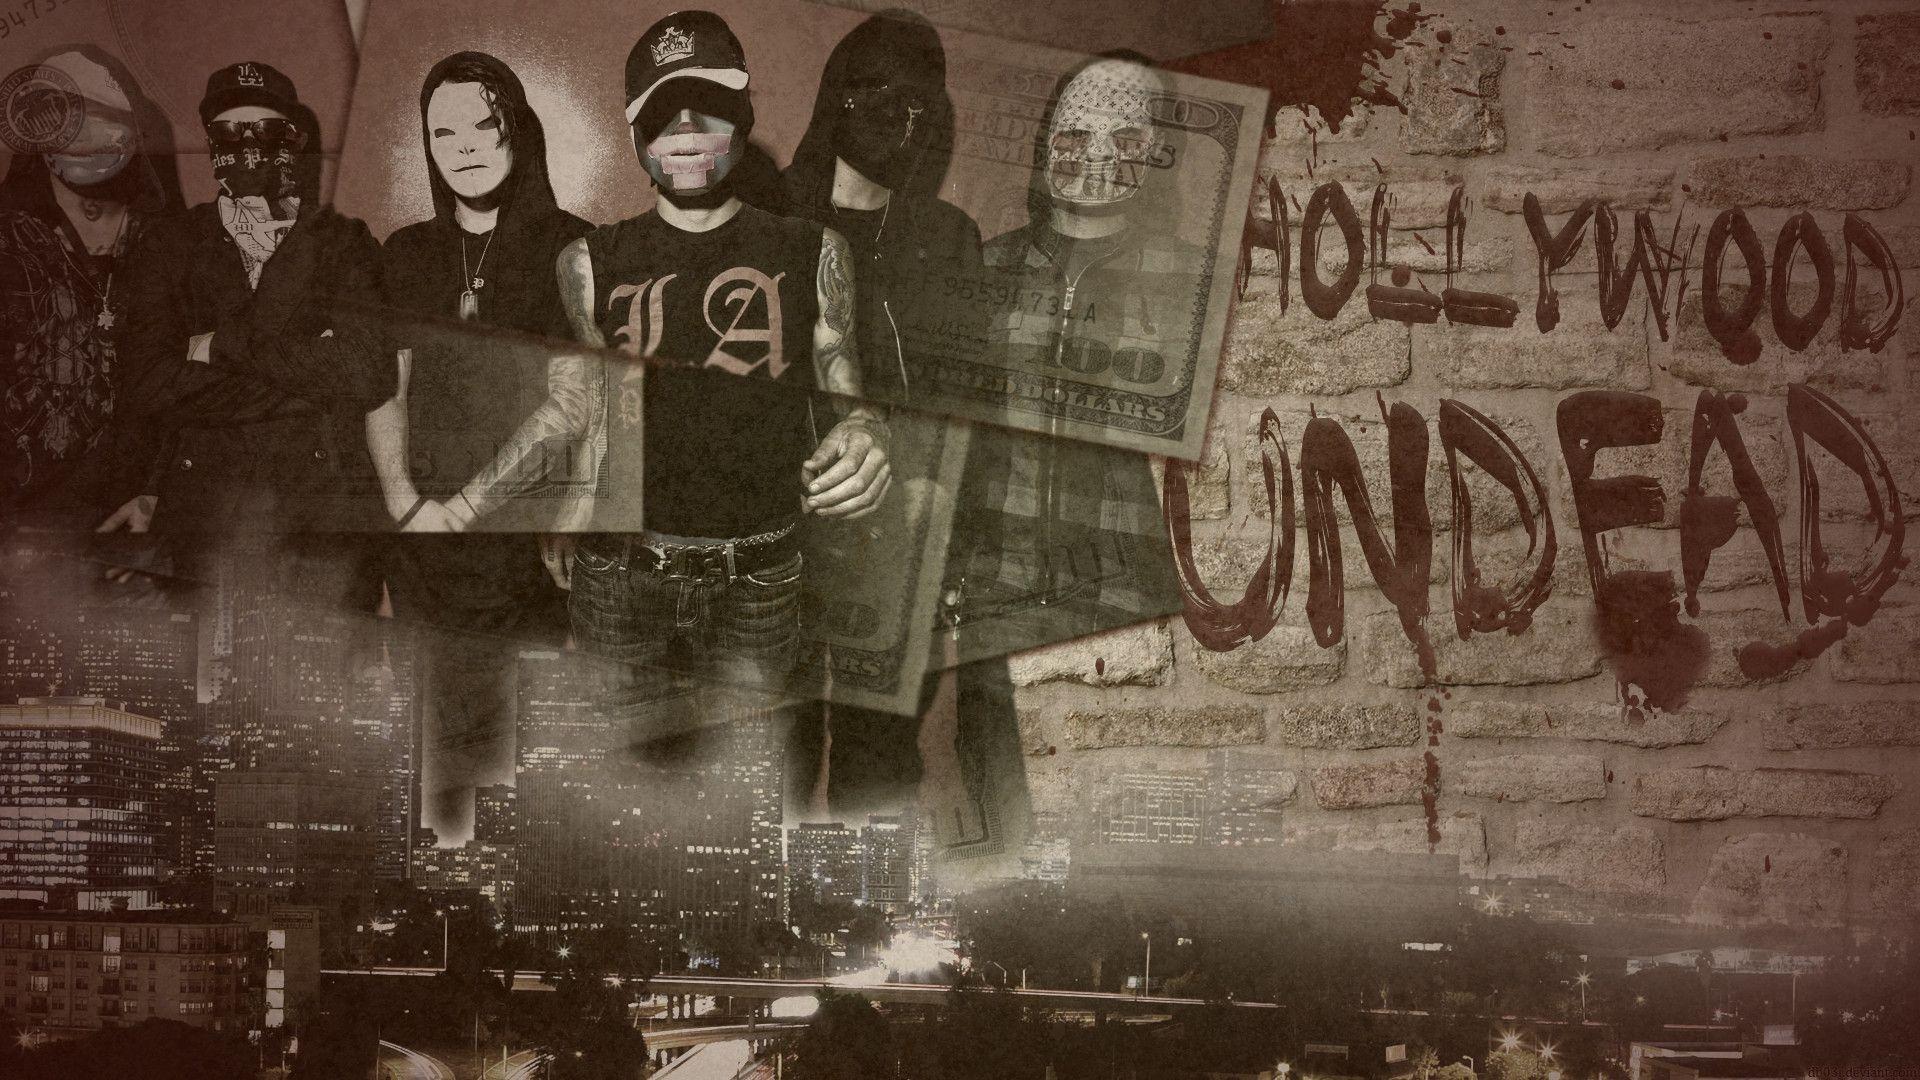 image For > Hollywood Undead Wallpaper Background